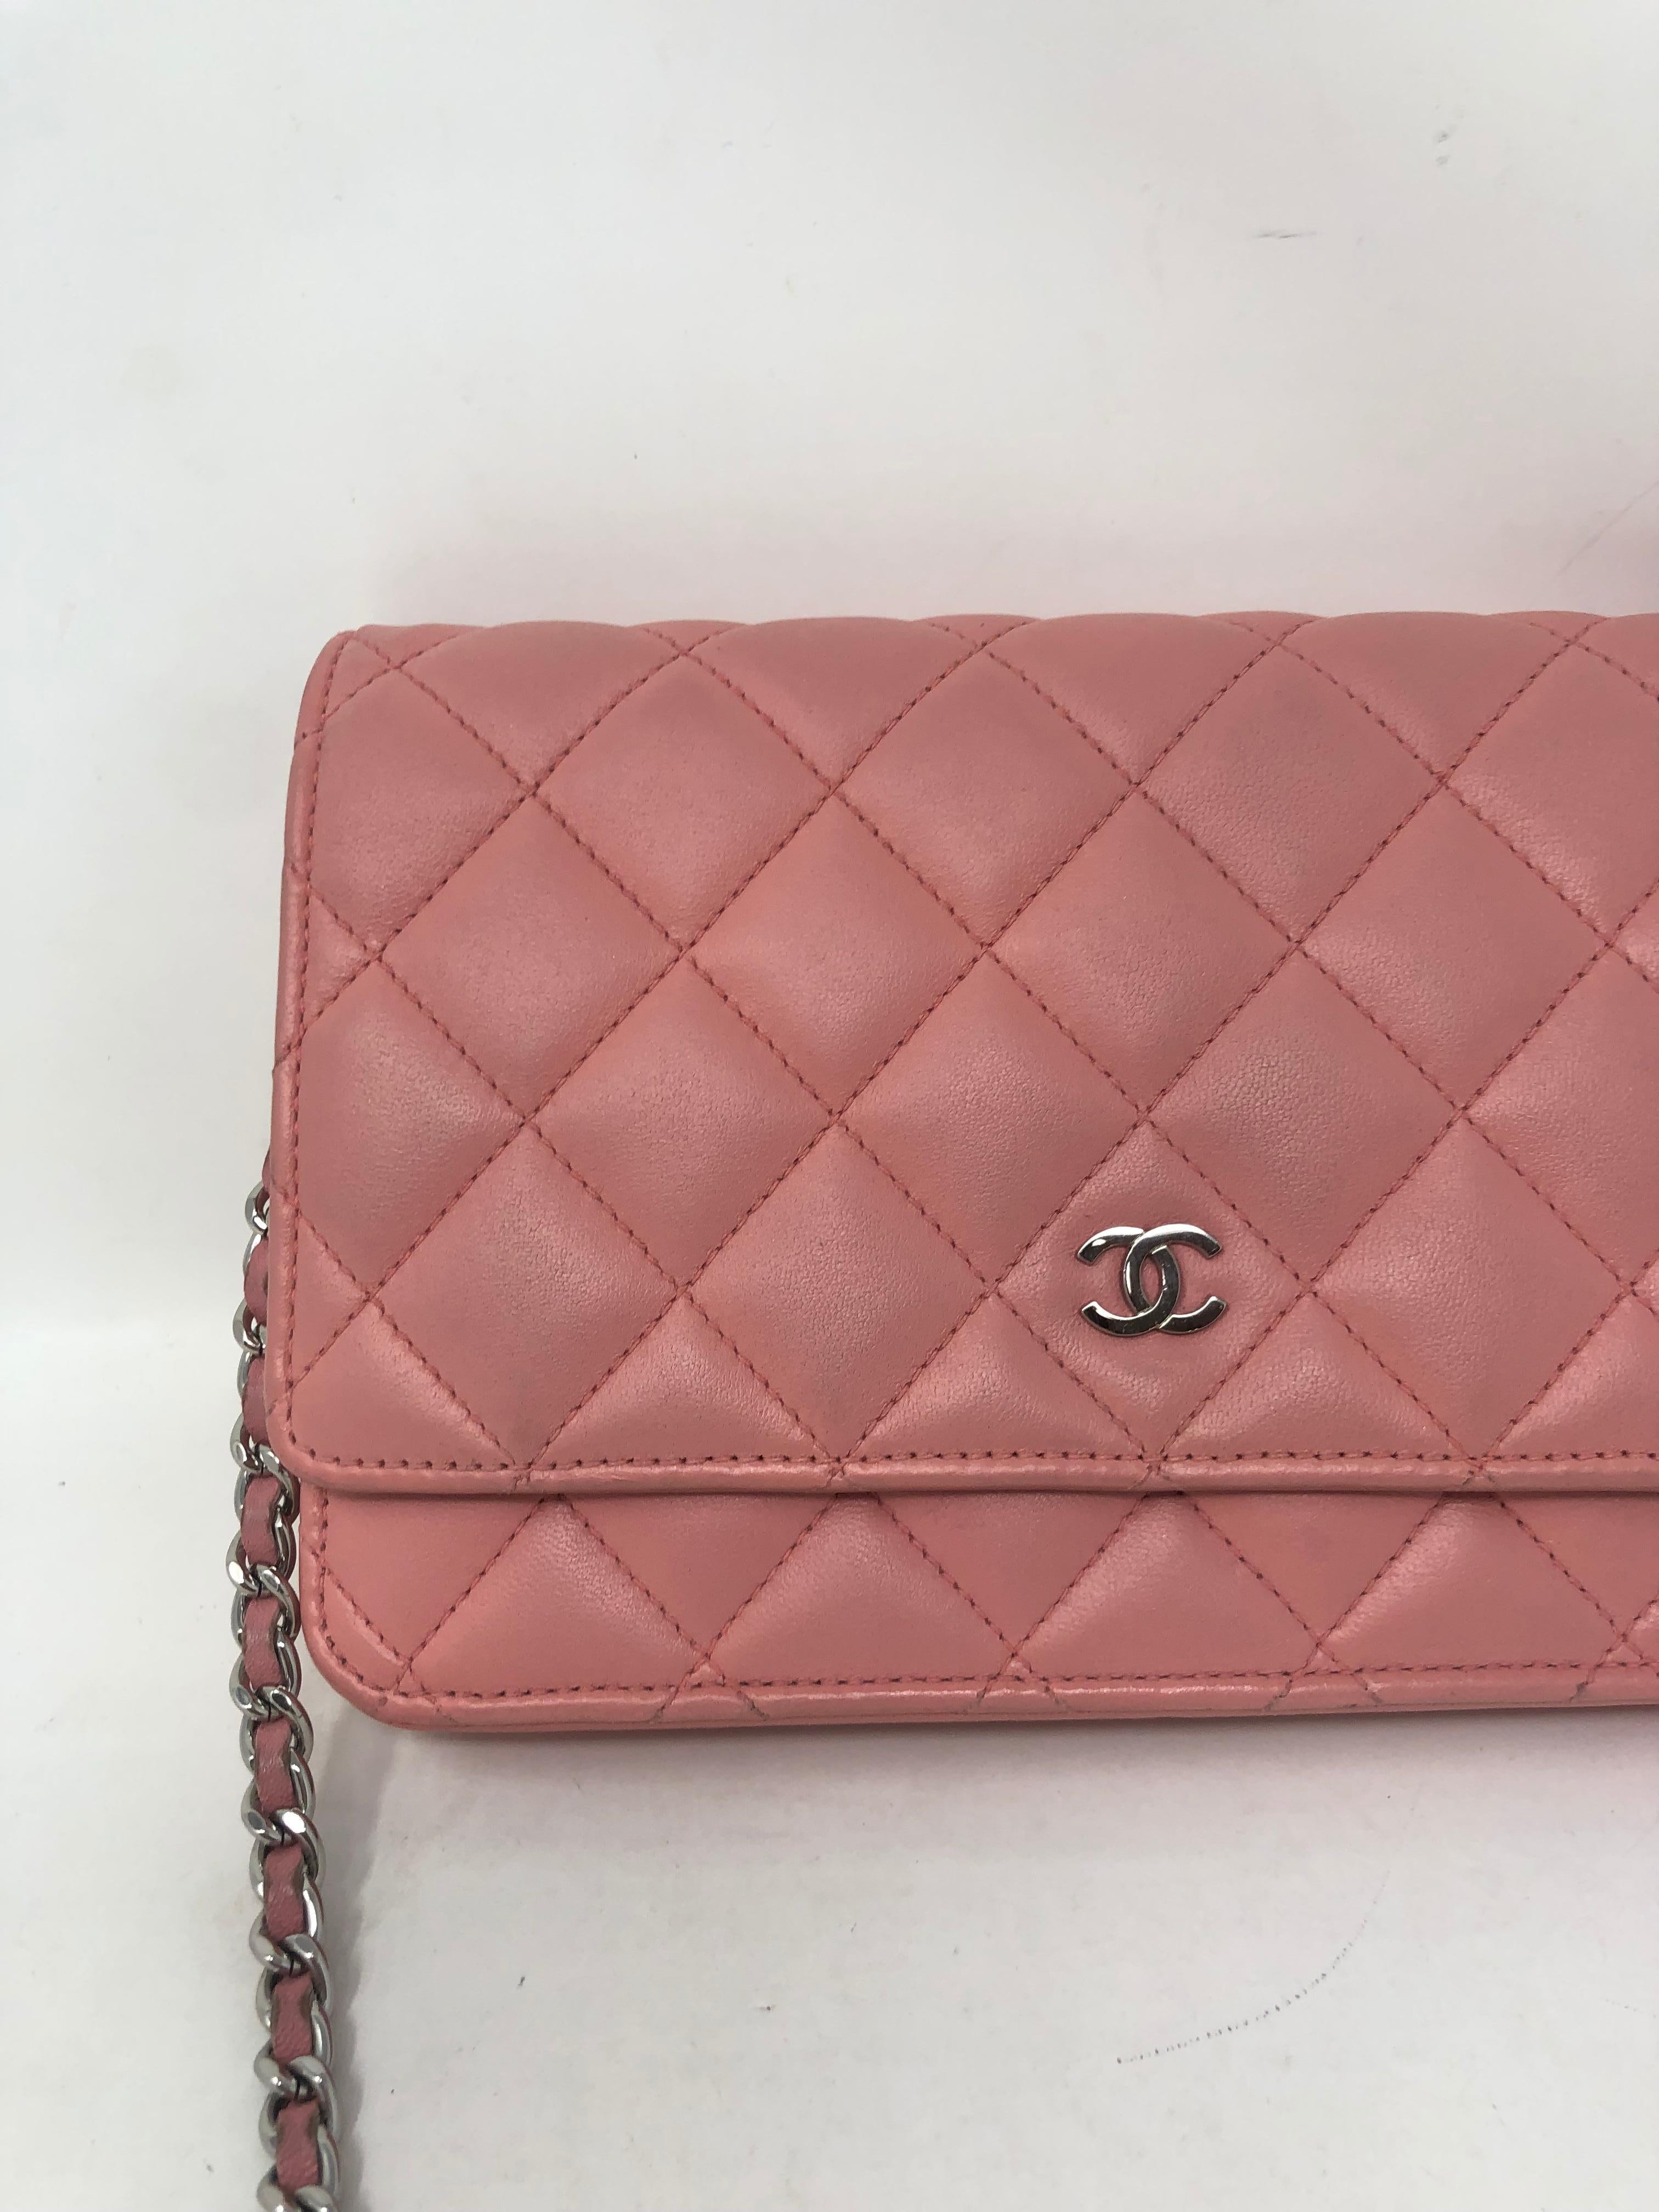 Chanel Pink Wallet On Chain. Pretty pale pink leather with silver hardware. Good condition. Can be worn as a clutch or as a crossbody bag. Includes authenticity card. Guaranteed authentic. 